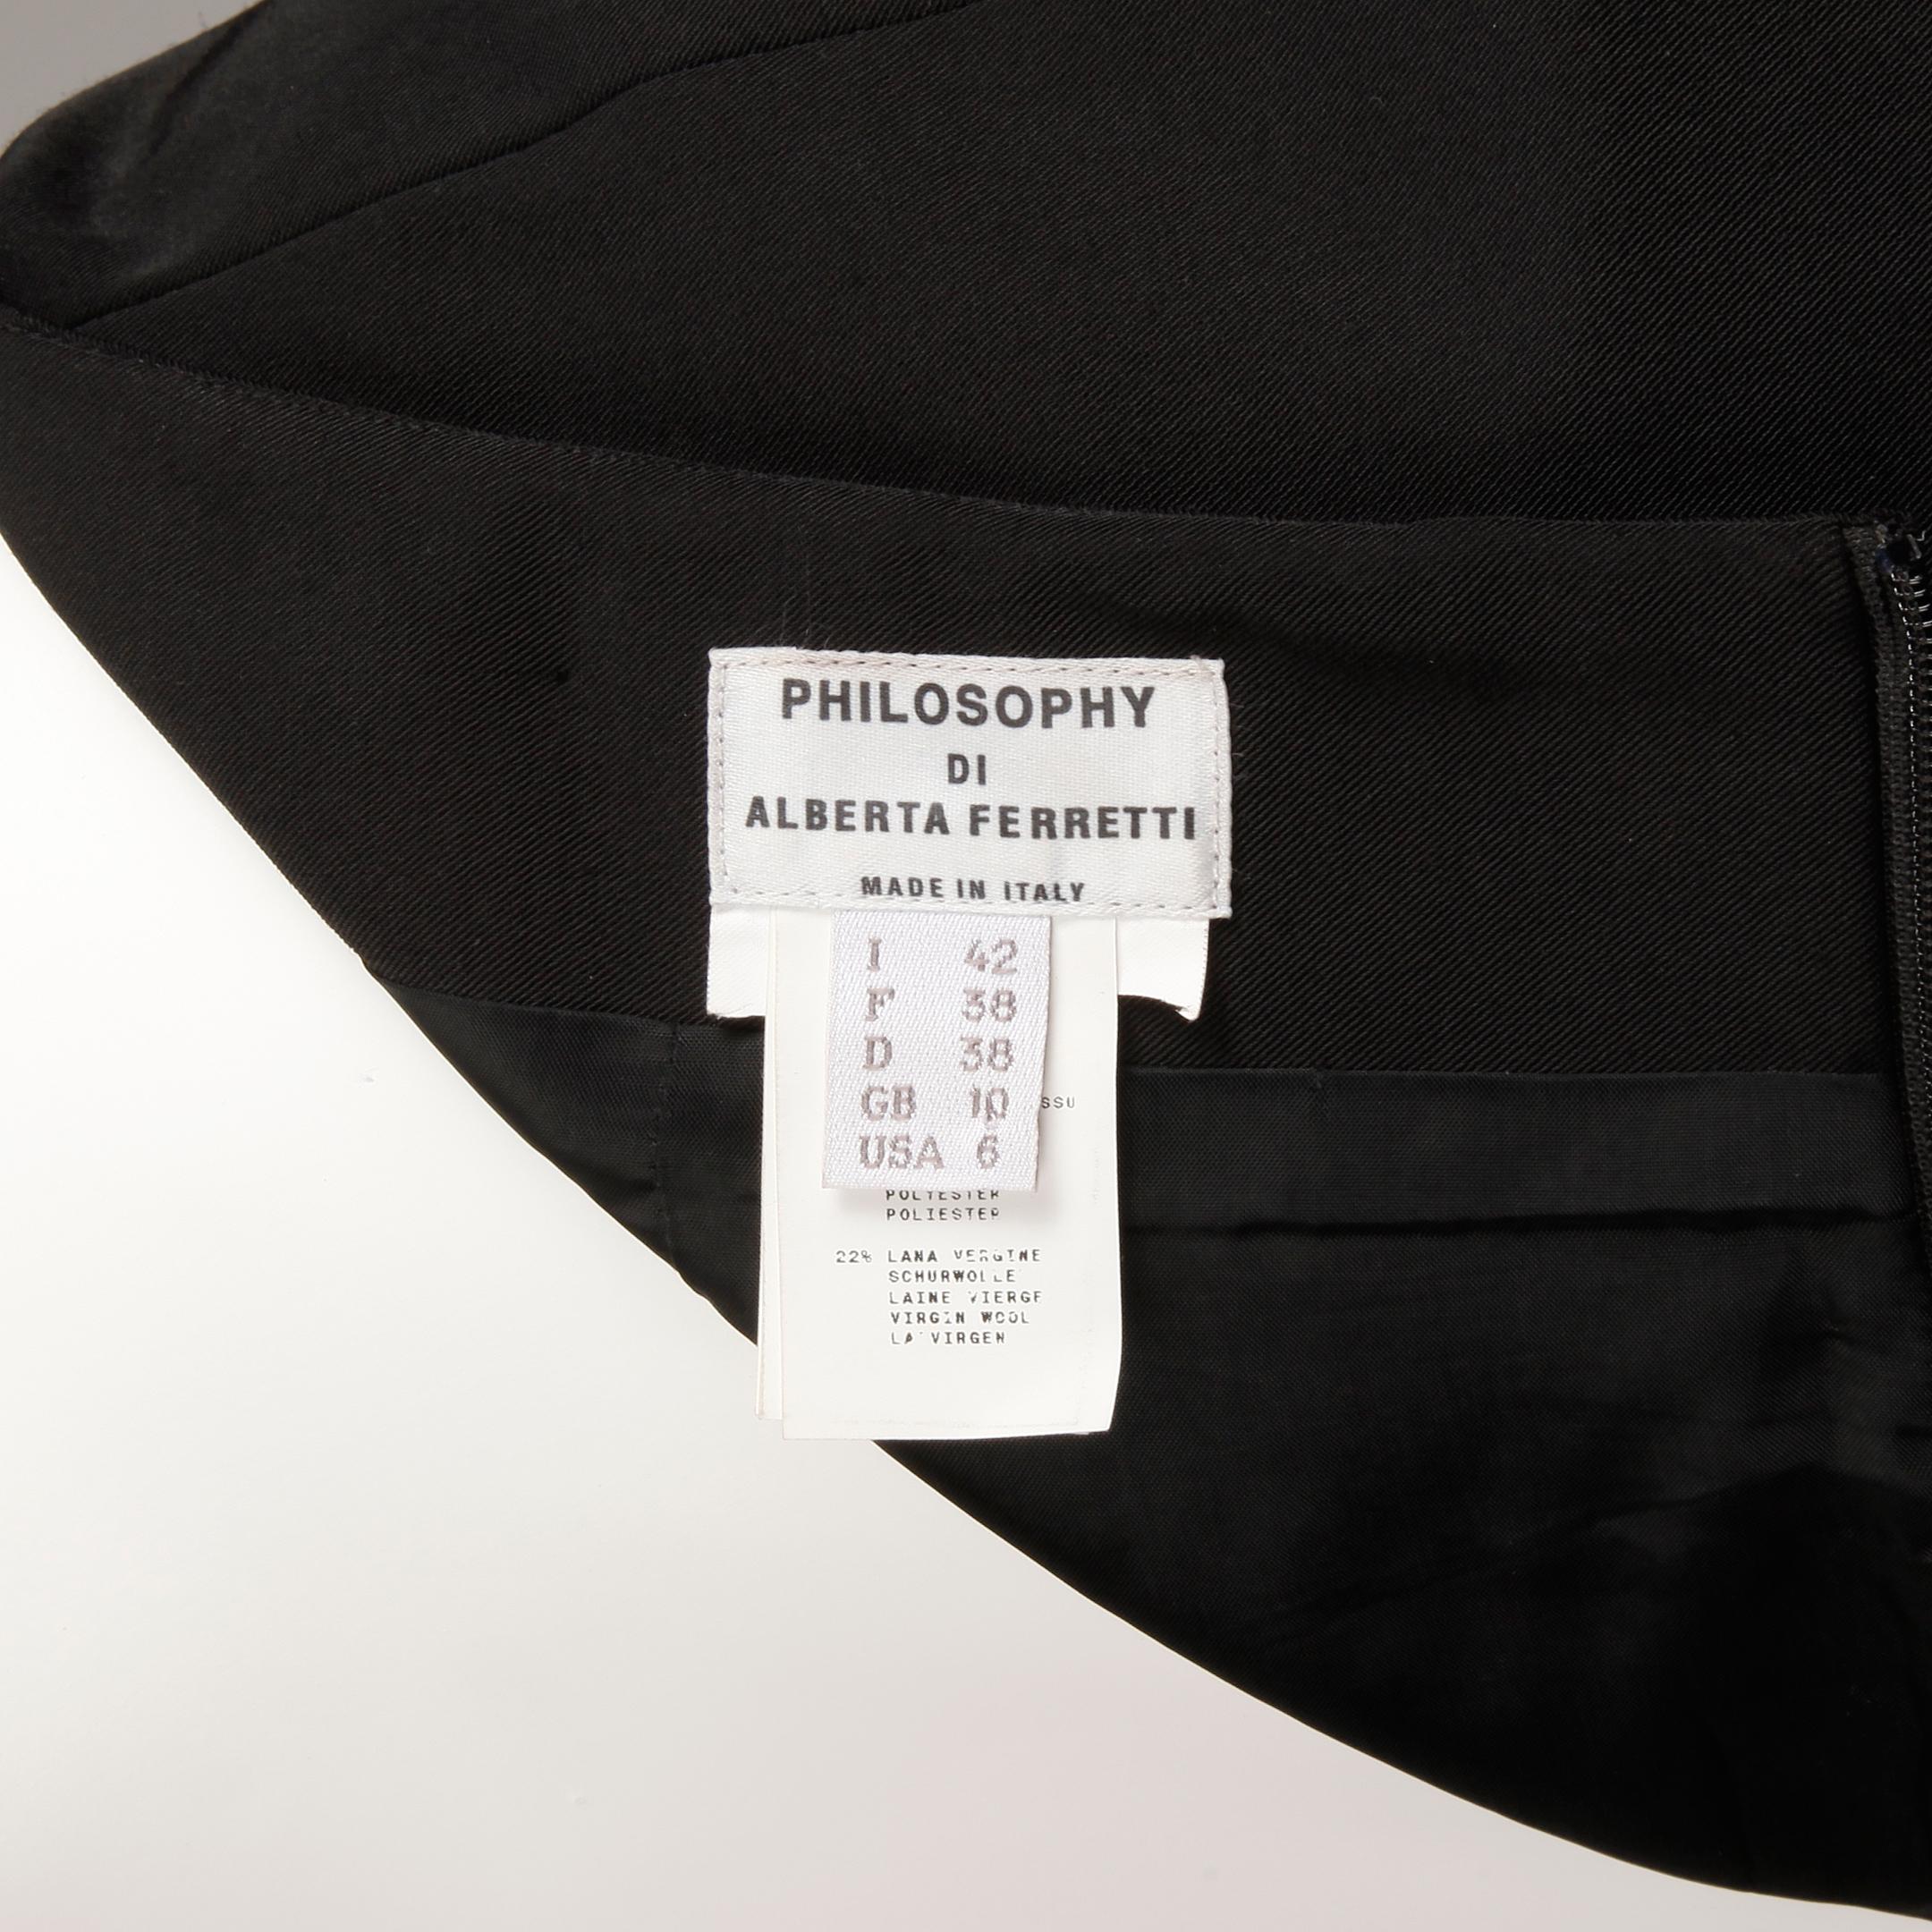 Black ruffle skirt by Philosophy di Alberta Ferretti from the early 2000s. Fully lined with rear zip closure. Side pockets. 71% polyester, 22% wool and 7% spandex. The marked size is I/42, F/38, D/38, GB/10, USA/6. The low waist measures 29